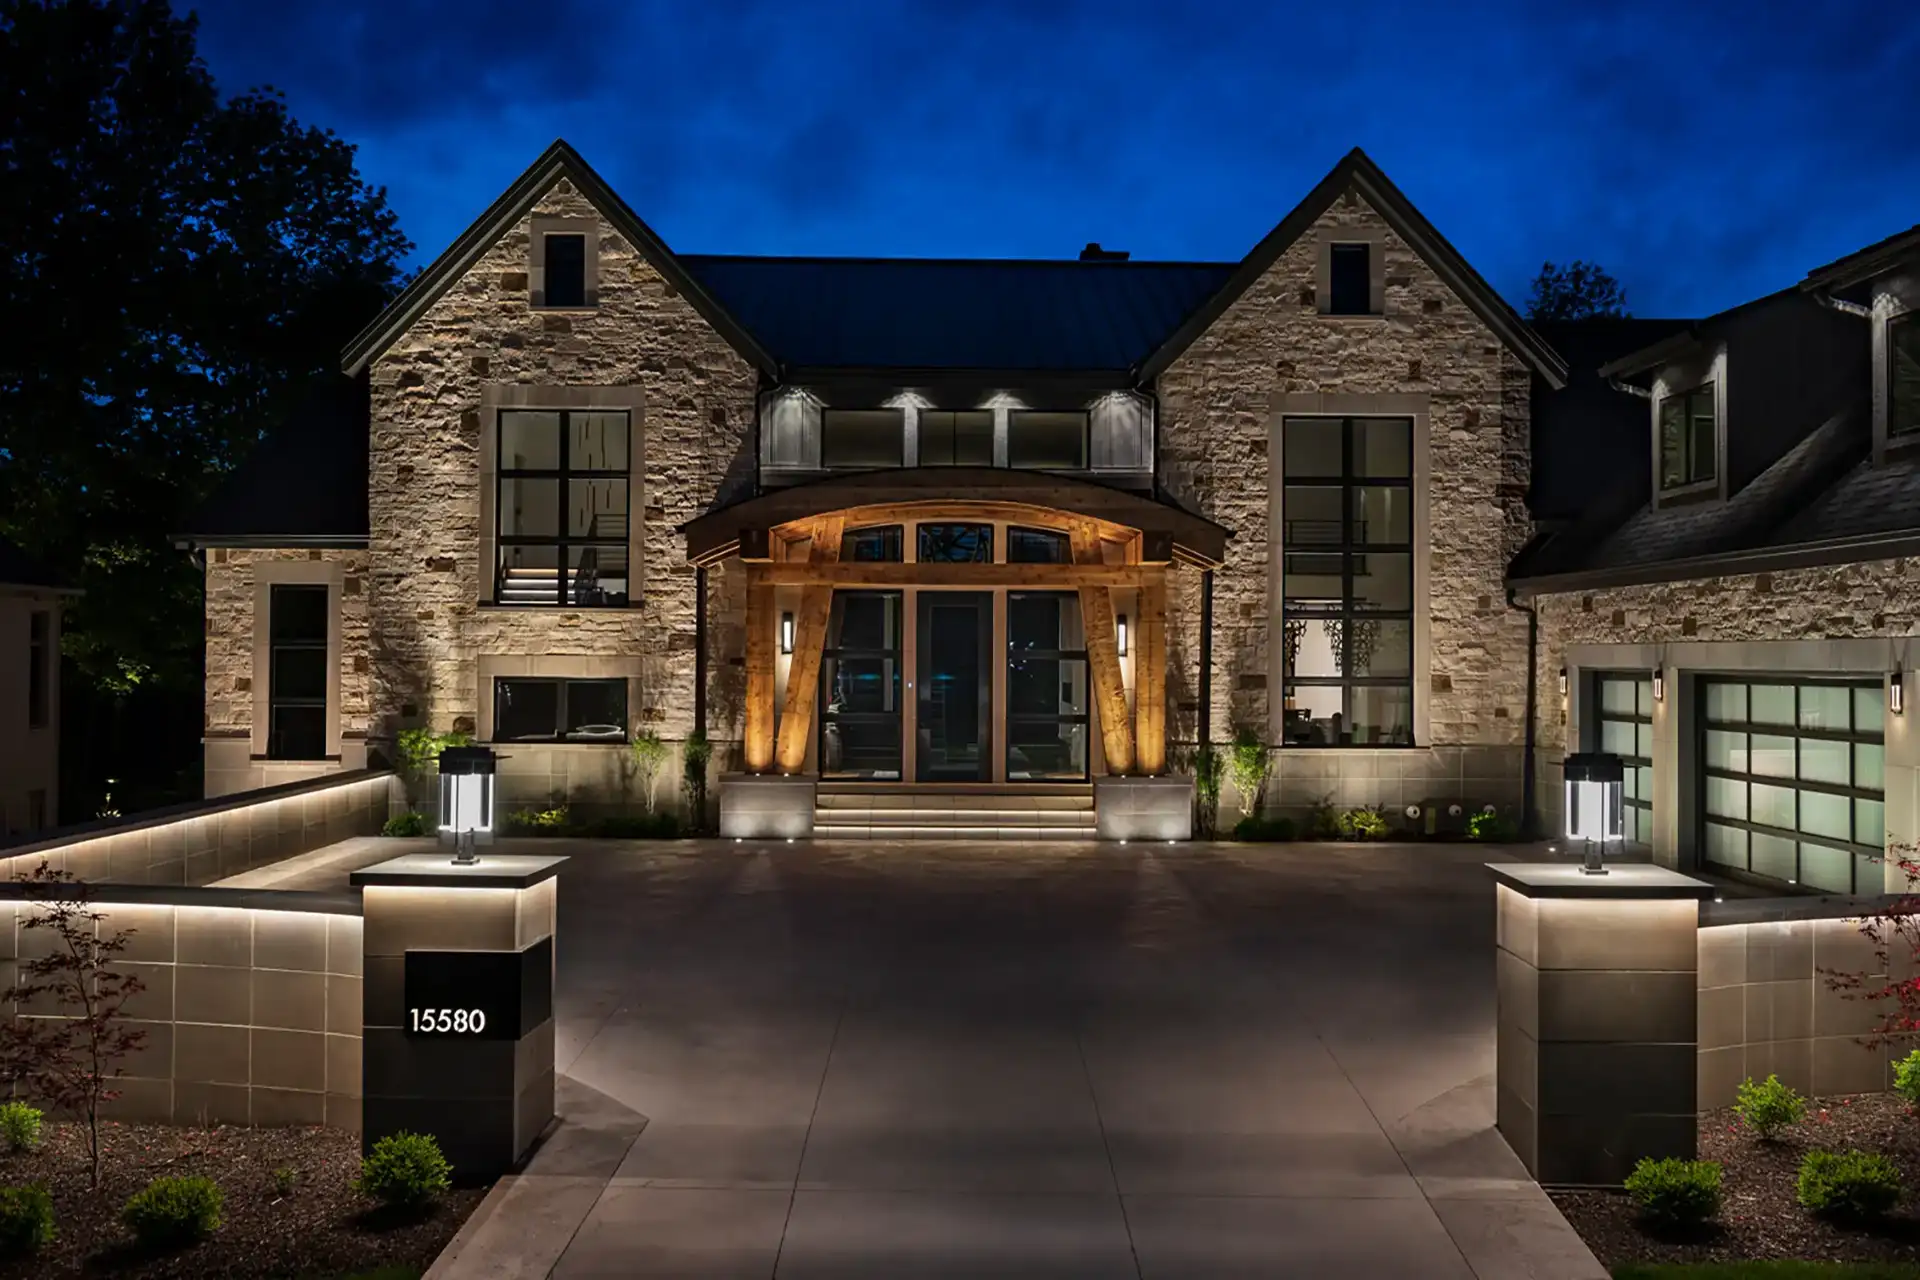 Koenig residence image 2 front entry mailbox lighting Lighthouse Outdoor Lighting and Audio Vail CO